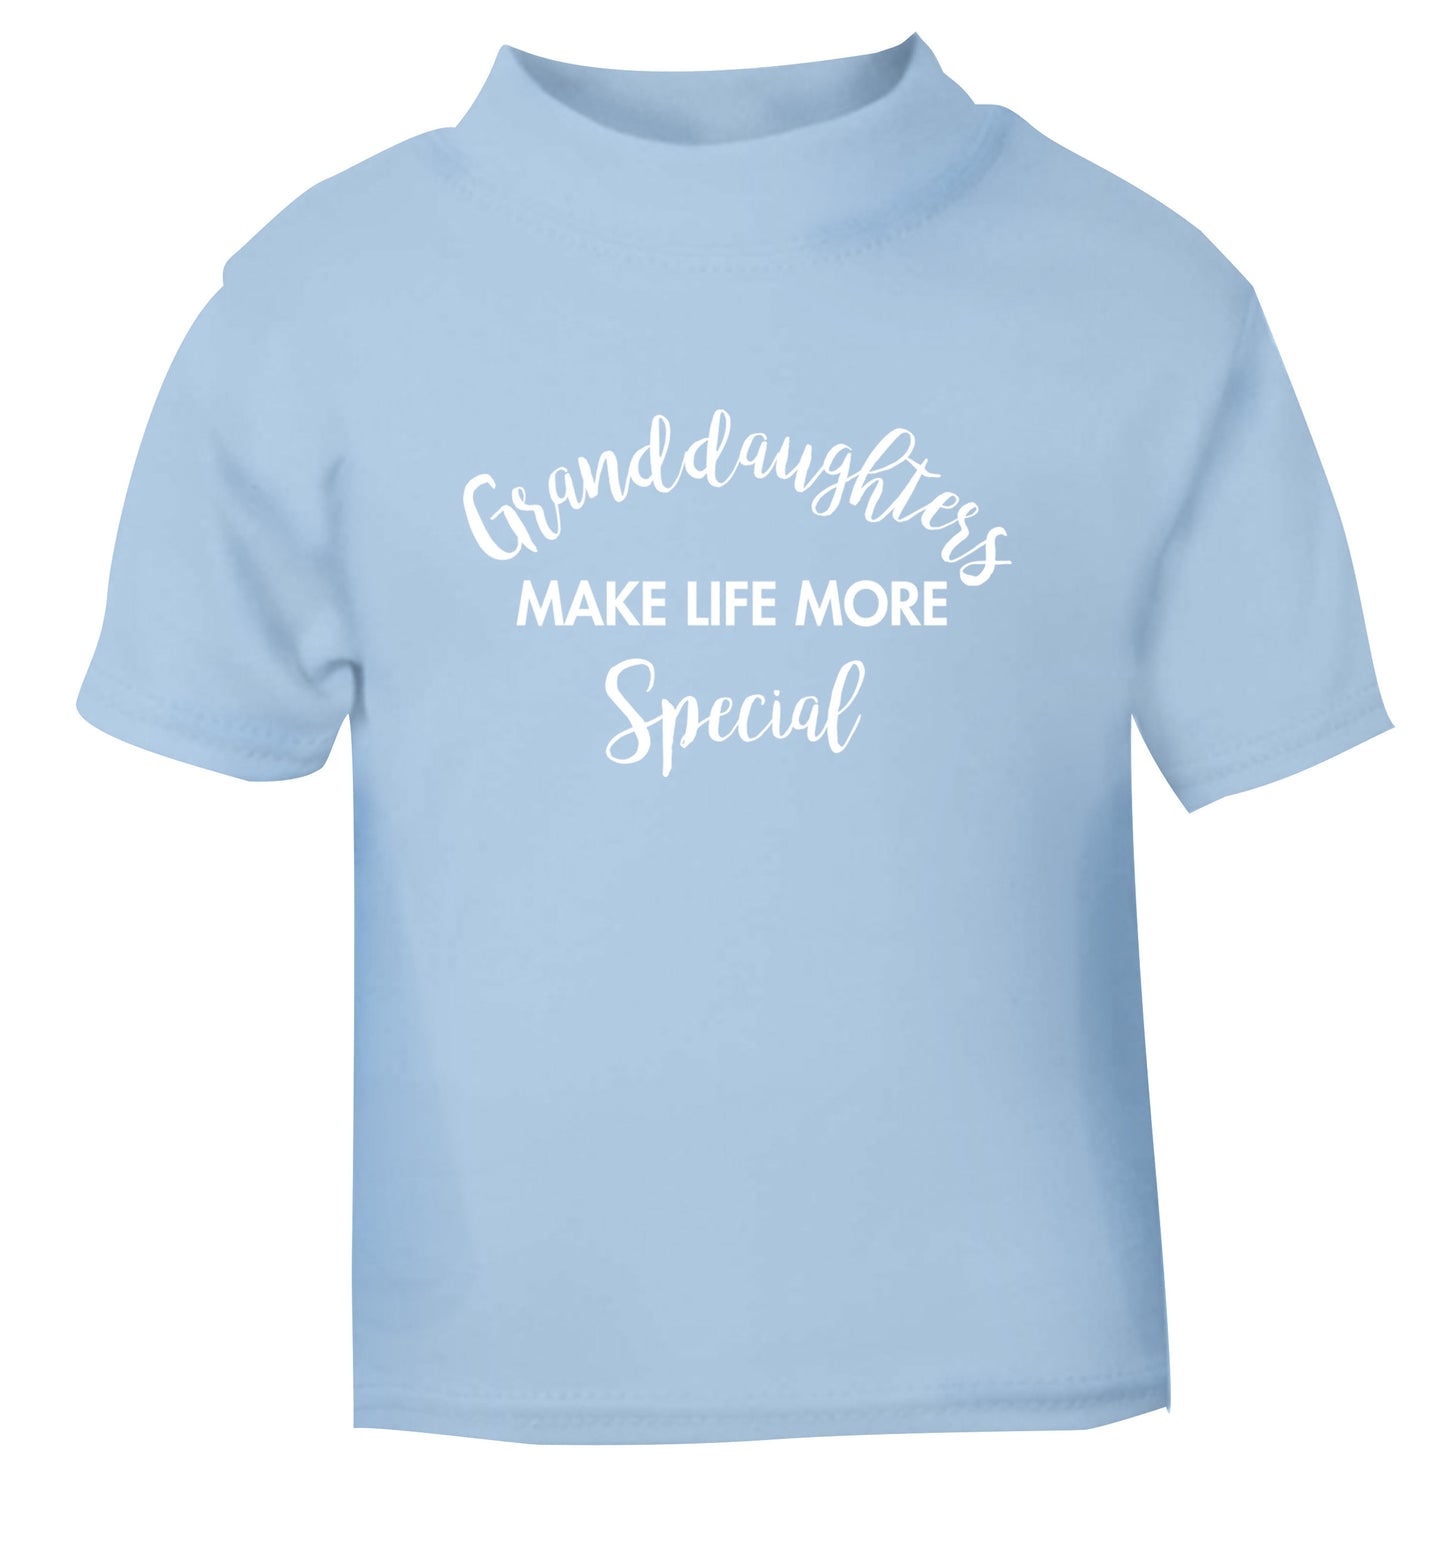 Granddaughters make life more special light blue Baby Toddler Tshirt 2 Years